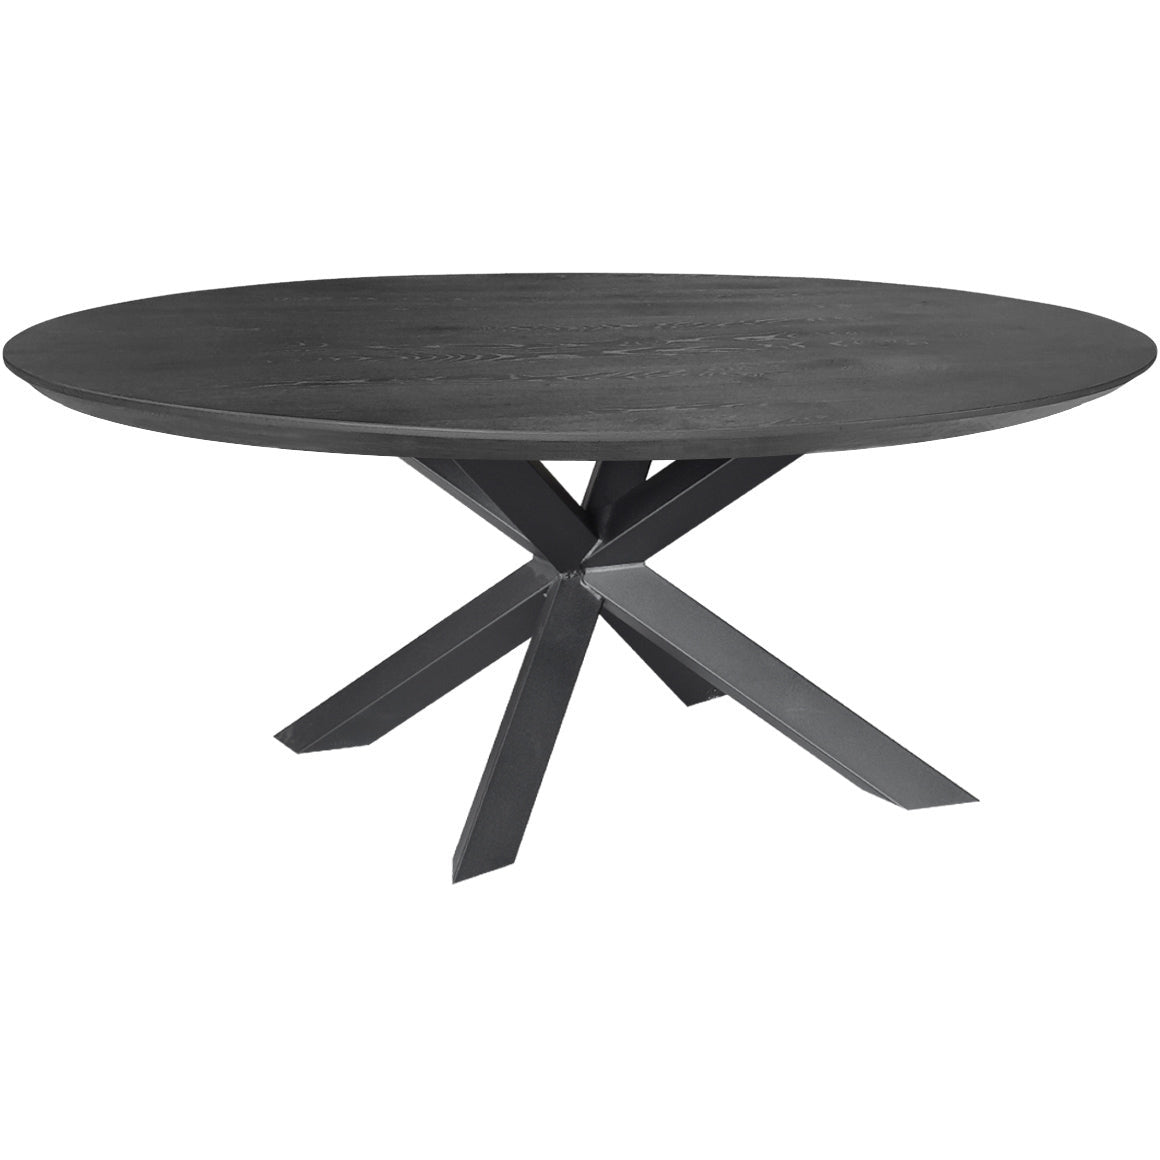 Dining table | Oval | Black | Oak wood | Lacquered | Spiderpaw